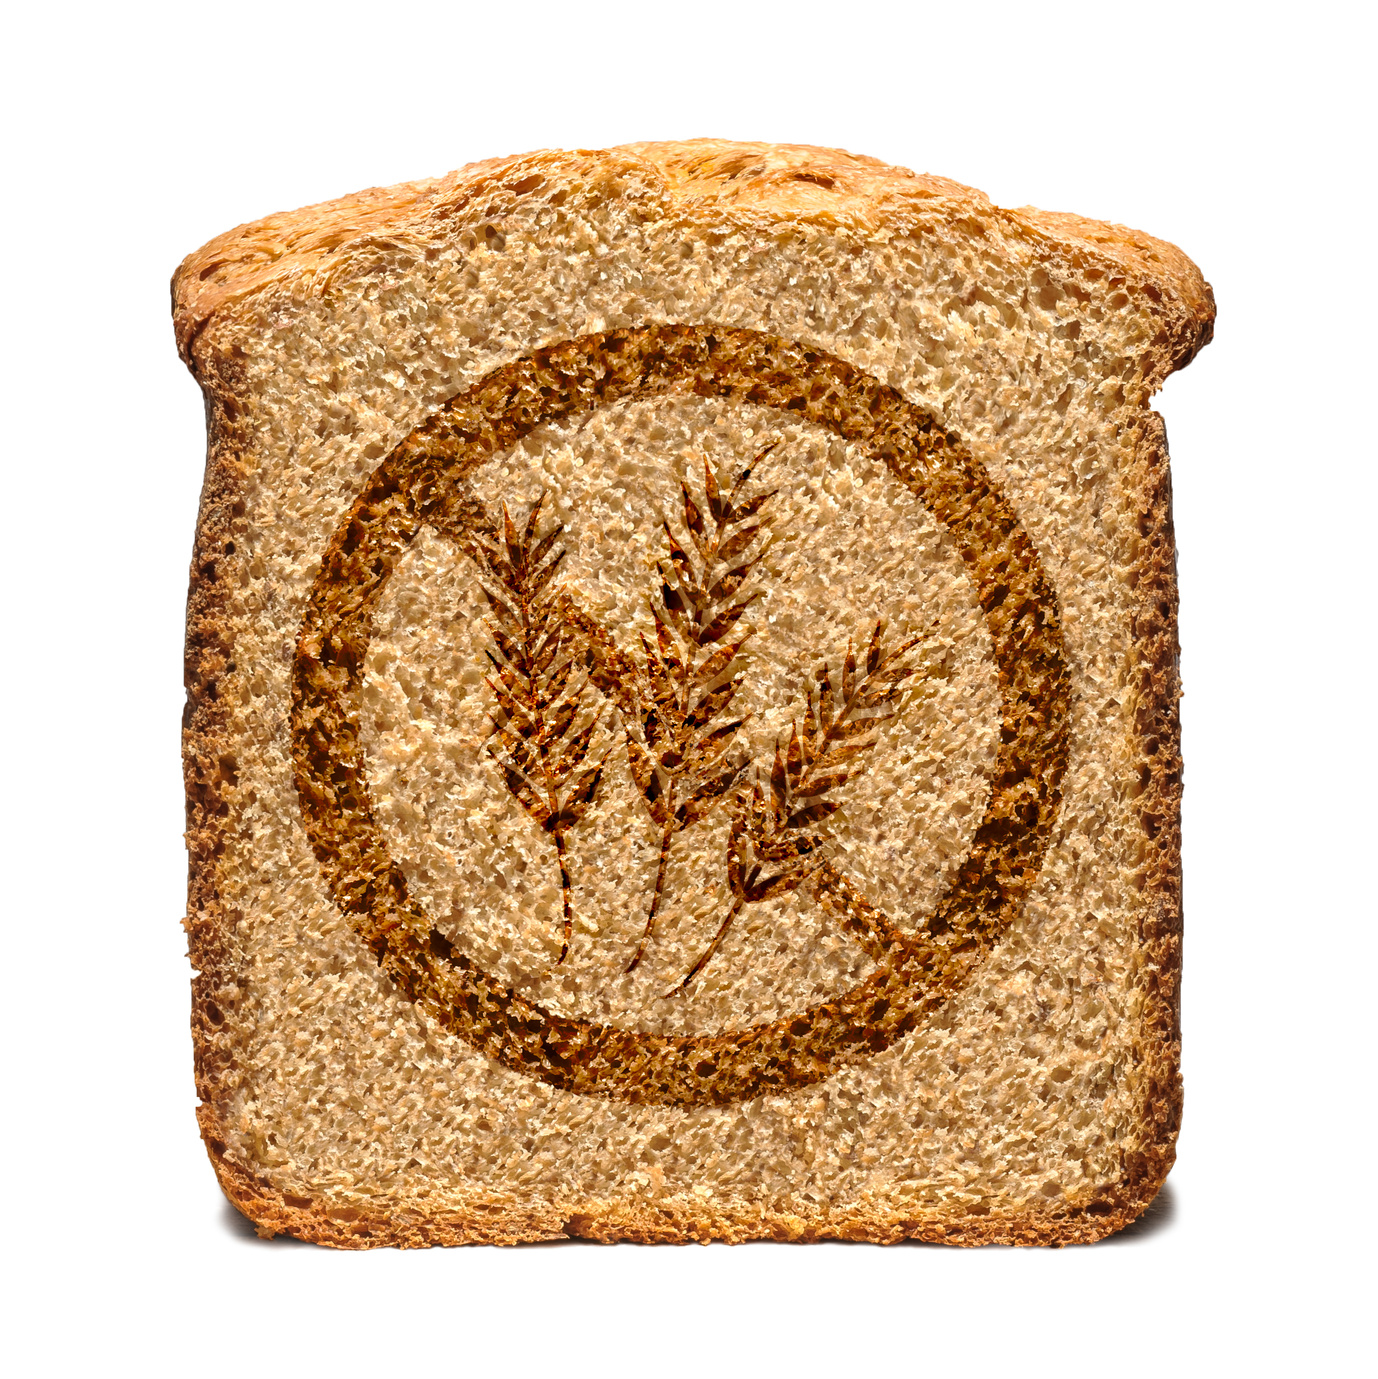 HOW WHEAT DAMAGES OUR BODIES AND CAUSES WEIGHT GAIN